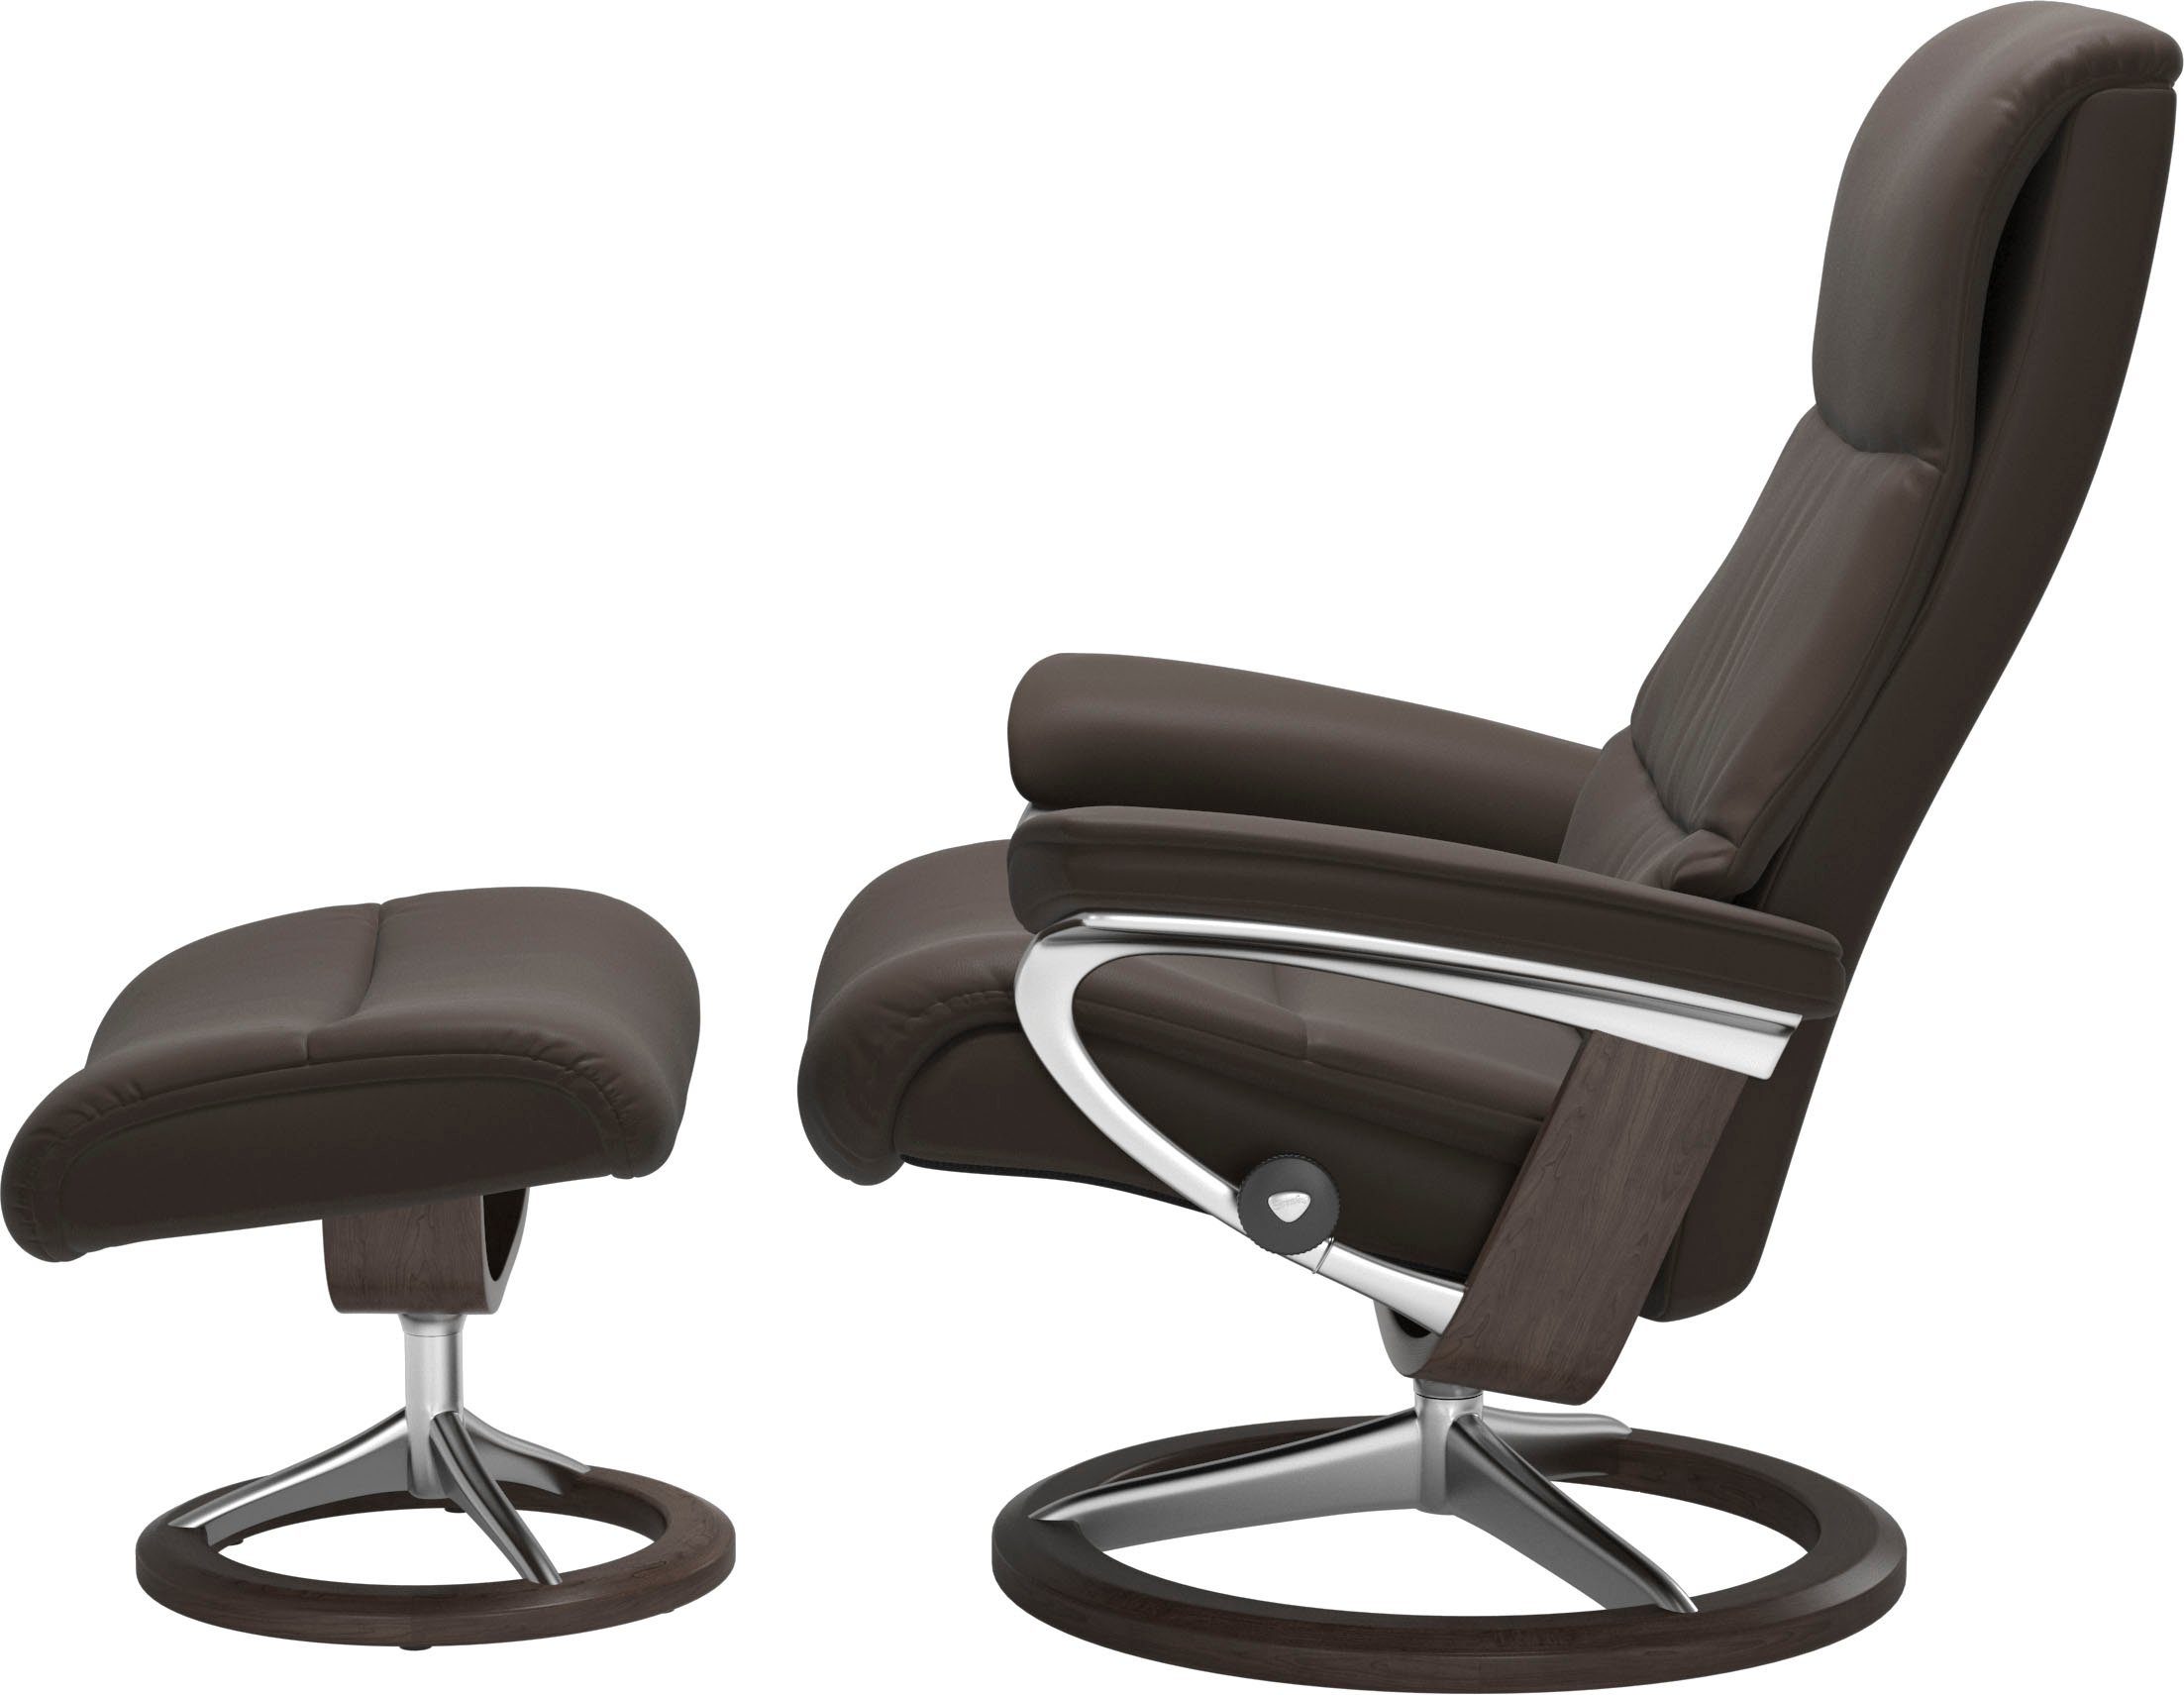 Wenge Base, Signature Relaxsessel Stressless® View, Größe S,Gestell mit